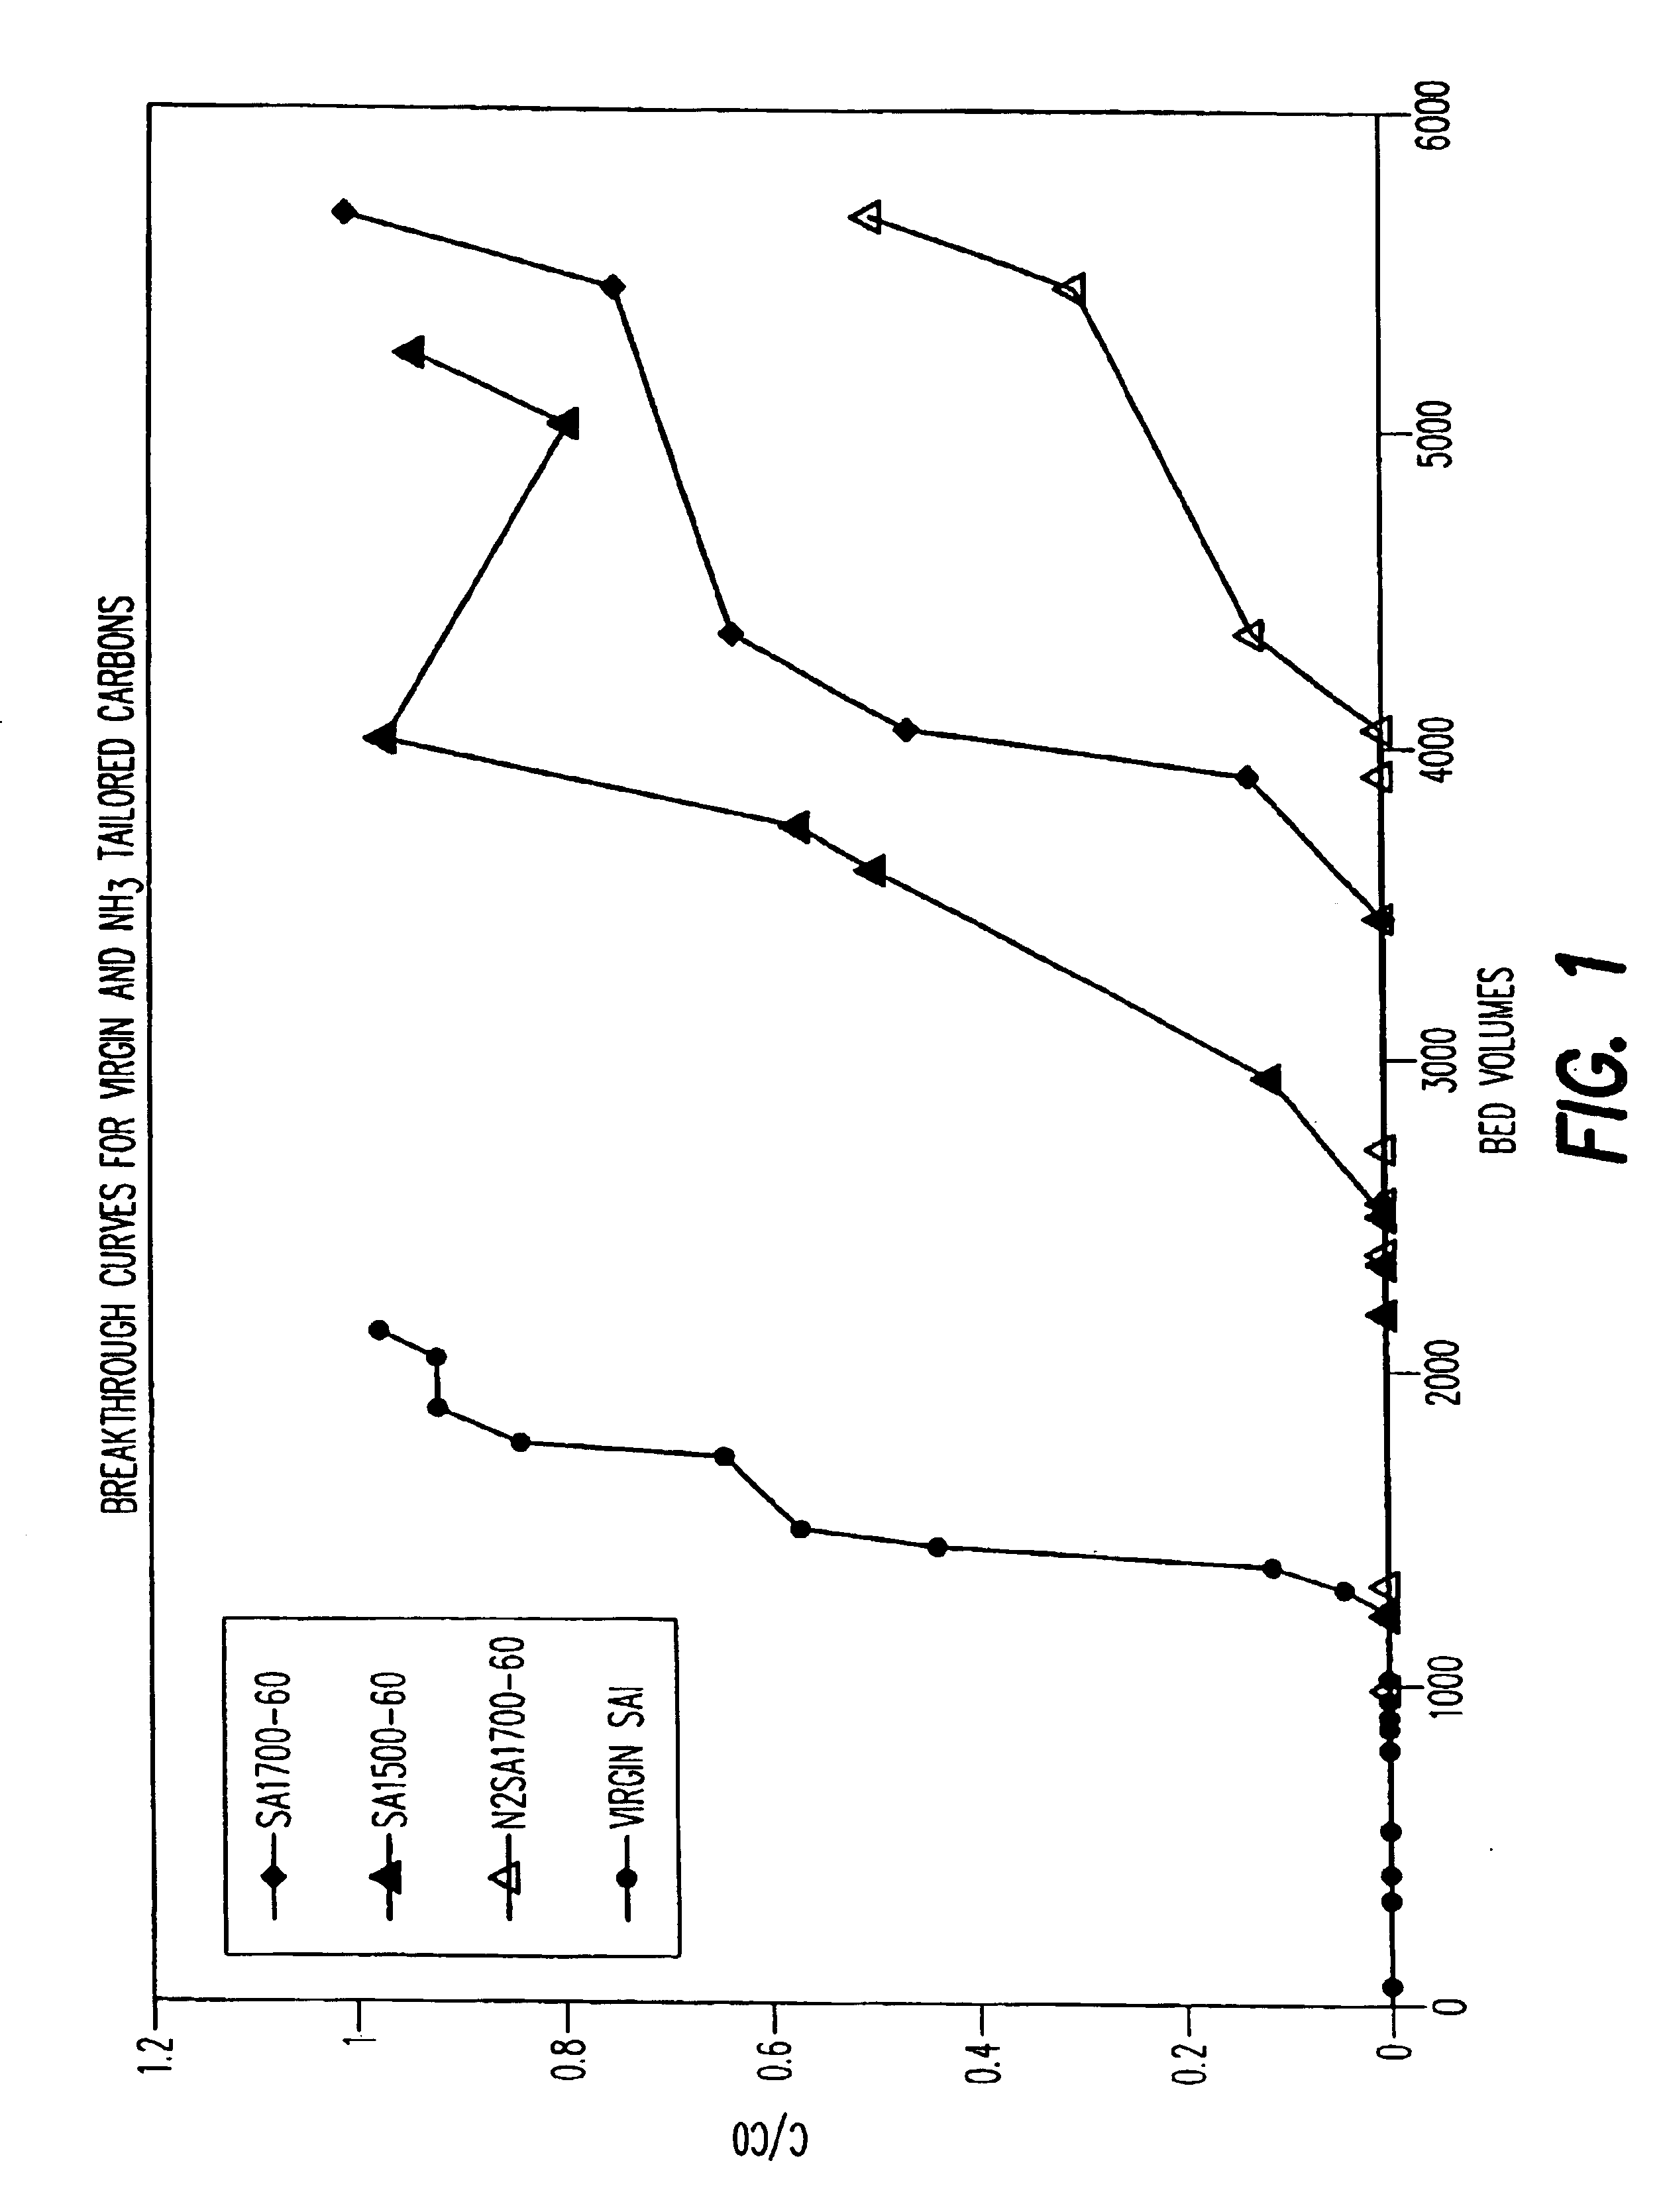 Method for perchlorate removal from ground water